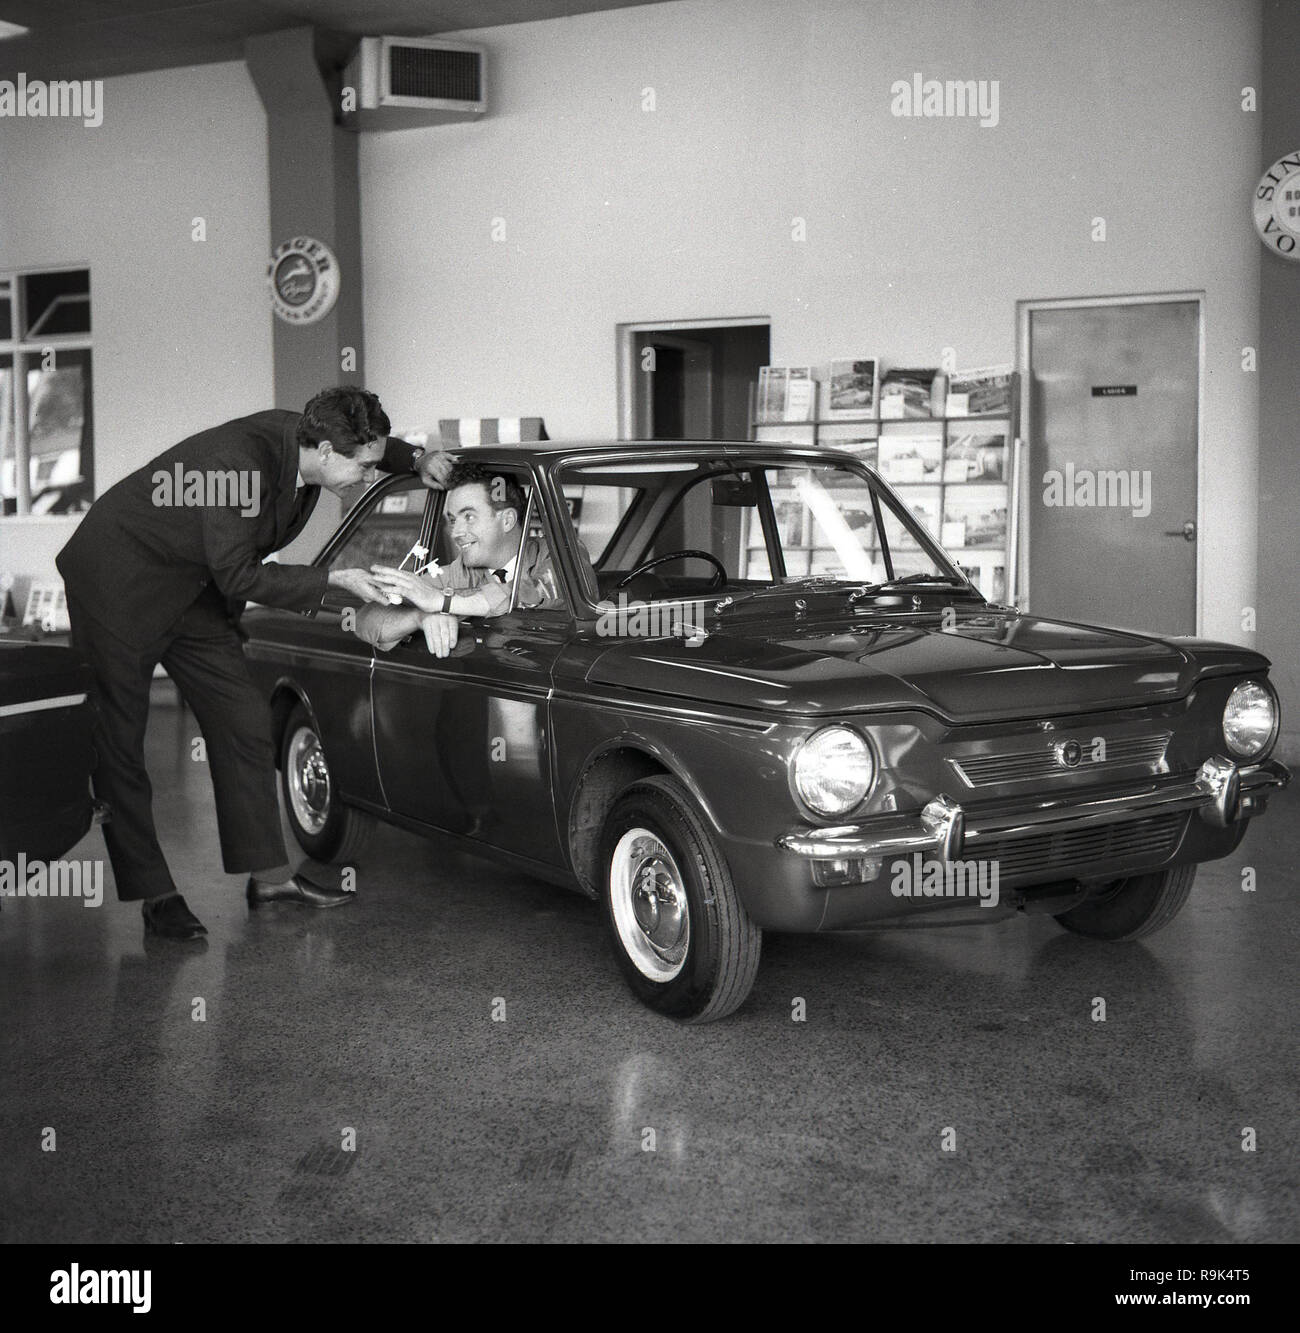 1965, historical, a man in Singer car showroom sitting in a Singer (Hillman) Imp car, England, UK being handed some large keys. The 2-door small economy car was built by the Rootes Group to compete with BMC's popular 'Mini' and featured several innovative design elements for it's day, such as a space saving aluminium rear-engine, with rear-wheel-drive. The 'Singer' Imps were badge-engineered Hillmans aimed at the slightly more upmarket small car buyer.  But reliability problems plagued the car and its losses saw the British Rootes Group taken over by the American Chrysler Corporation in 1967. Stock Photo